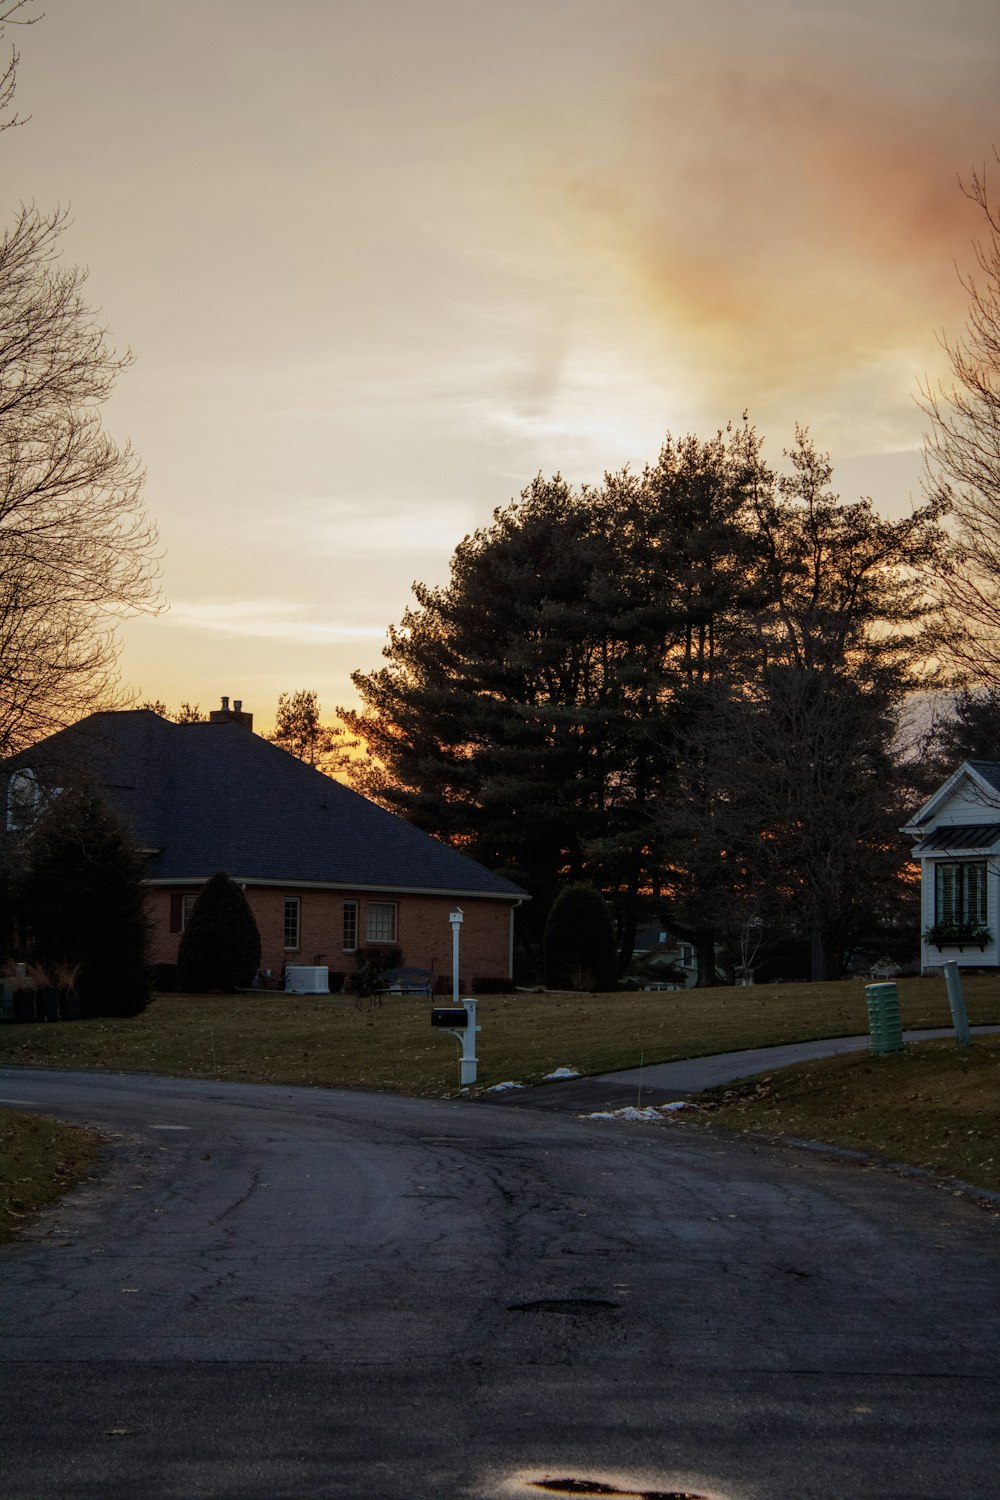 the sun is setting over a house and trees